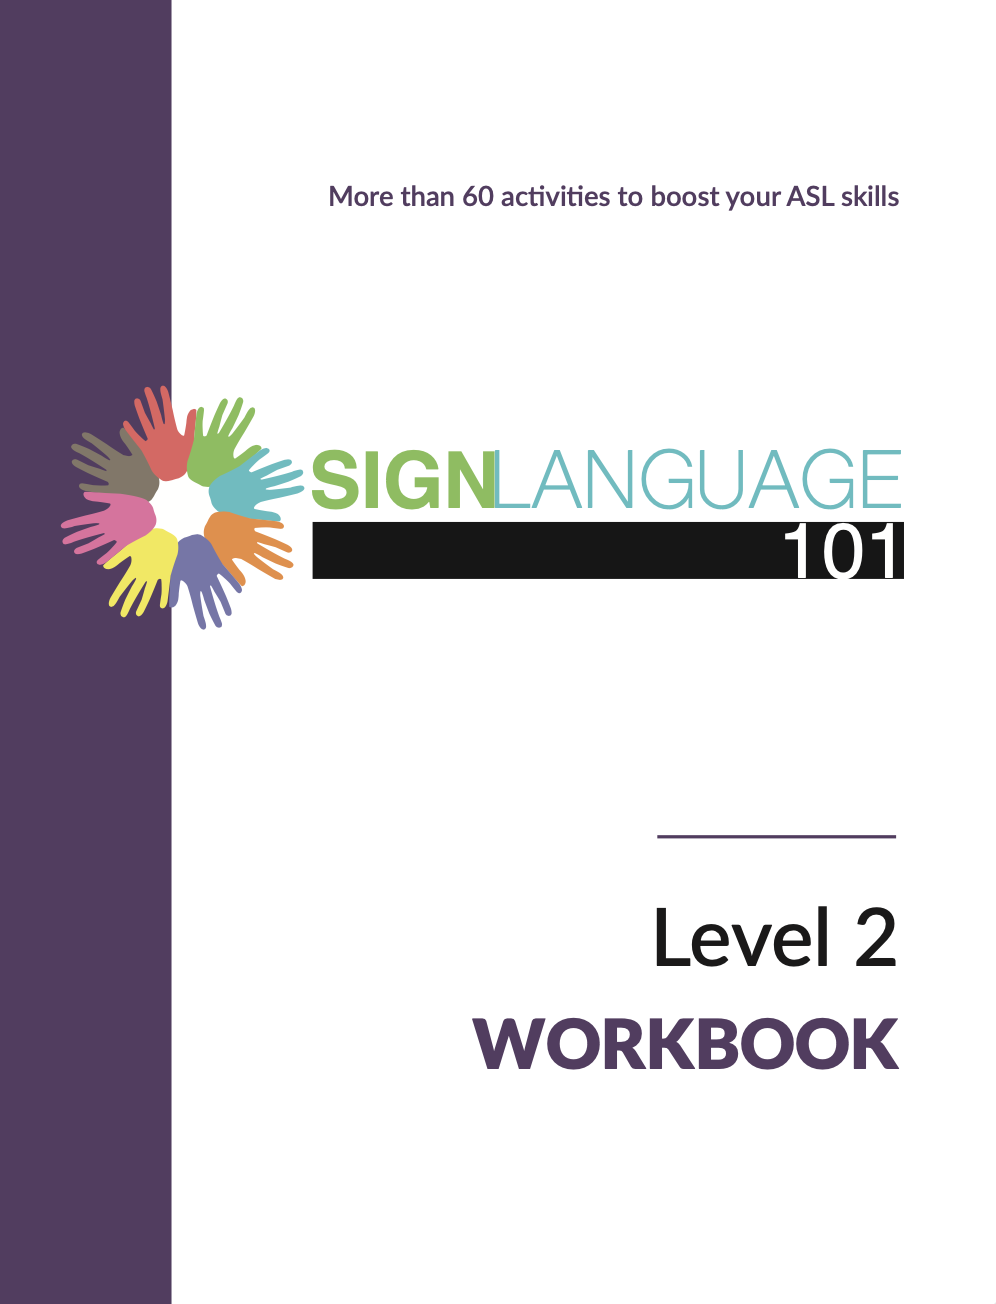 ASL Level 2 Course Workbook cover